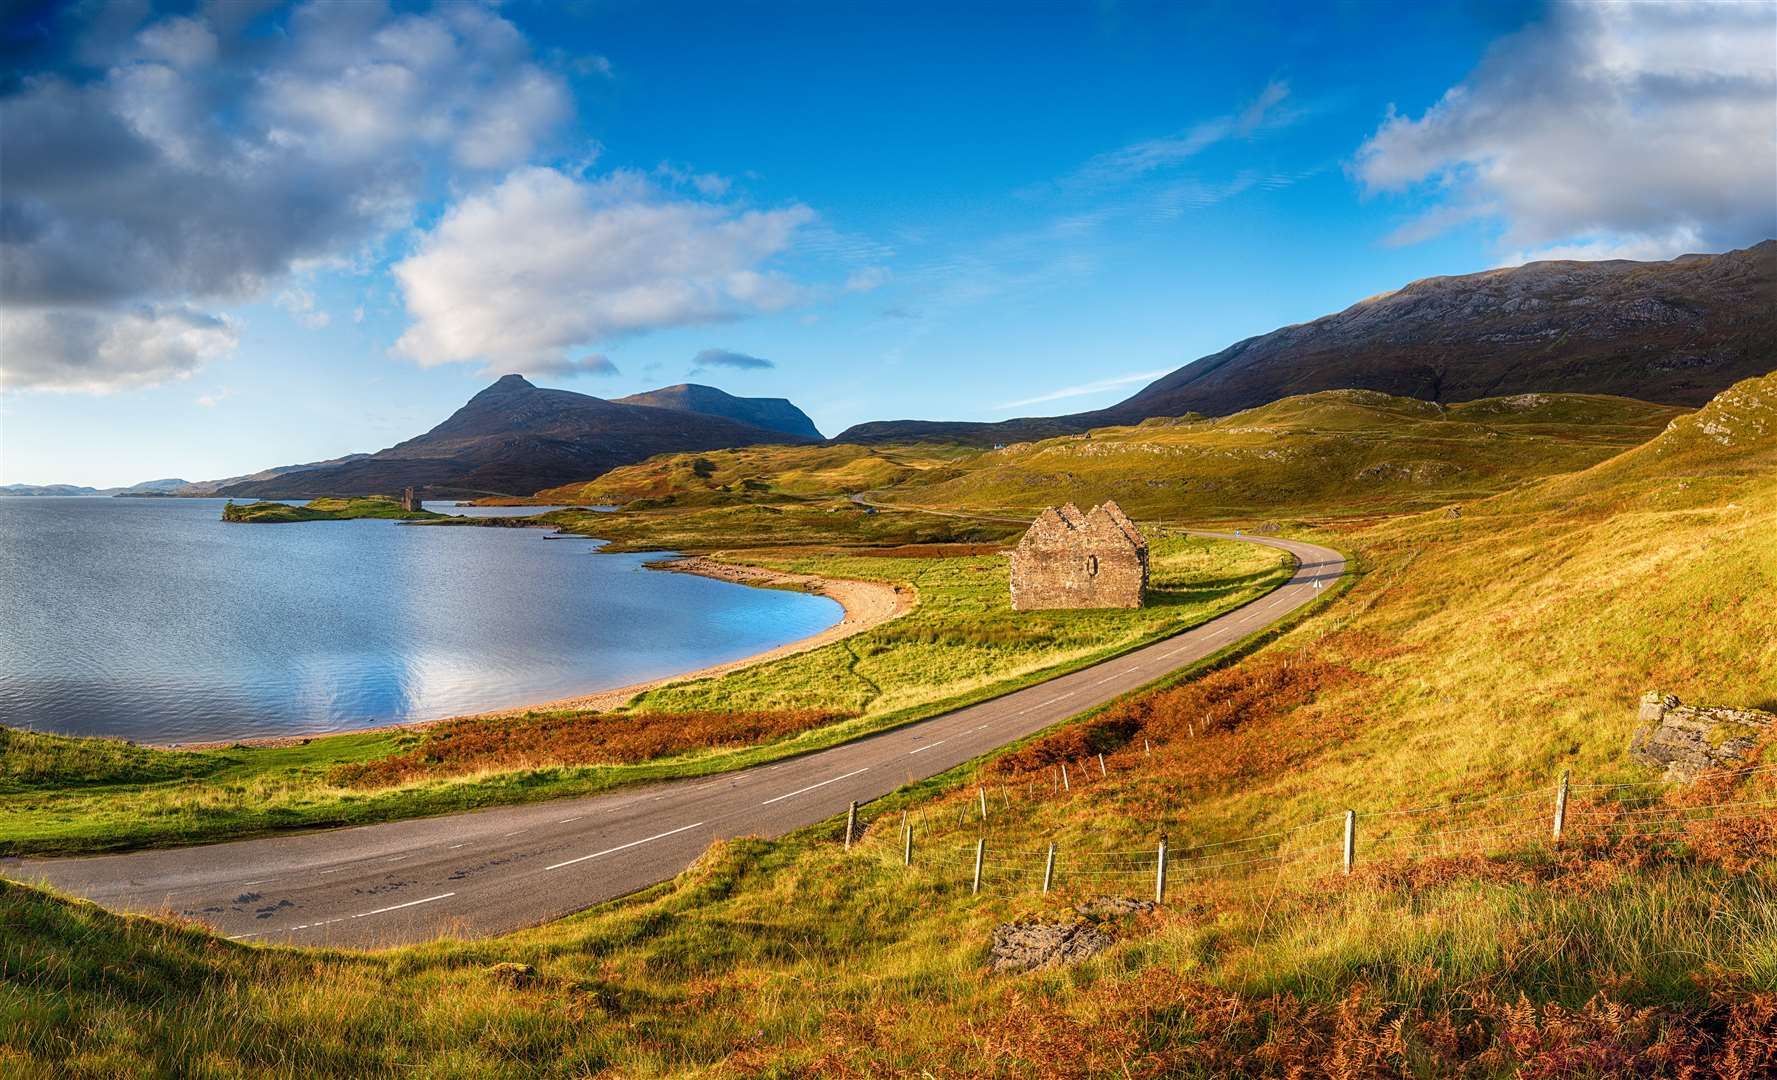 The open spaces of the Highlands will become an even more attractive draw for the post-Covid traveller.